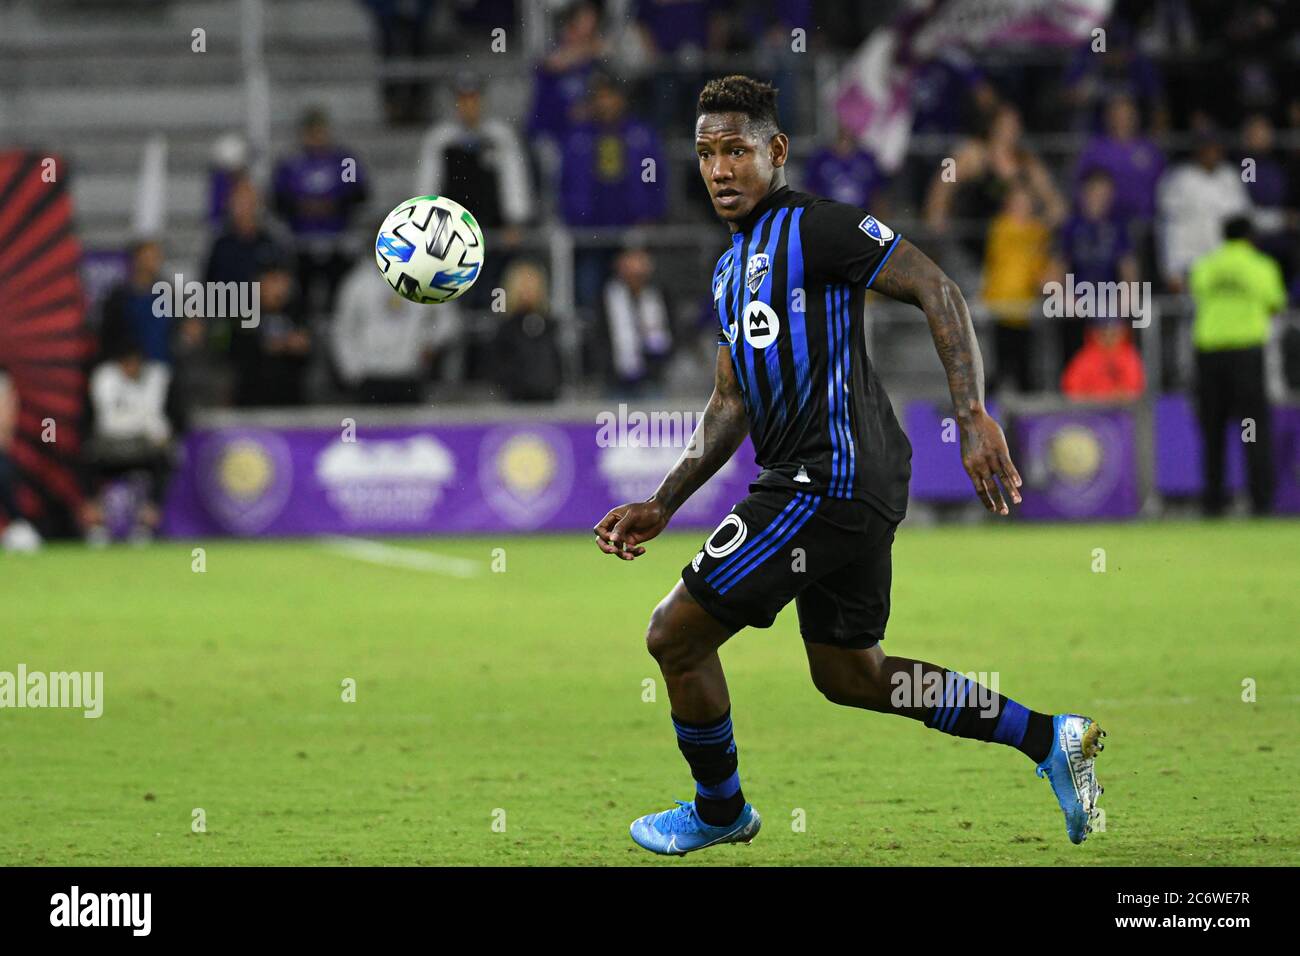 Montreal FC midfielder Romell Quioto #30 receives the ball from a team mate in a Friendly Match at Exploria Stadium in Orlando Florida on Saturday Feb Stock Photo